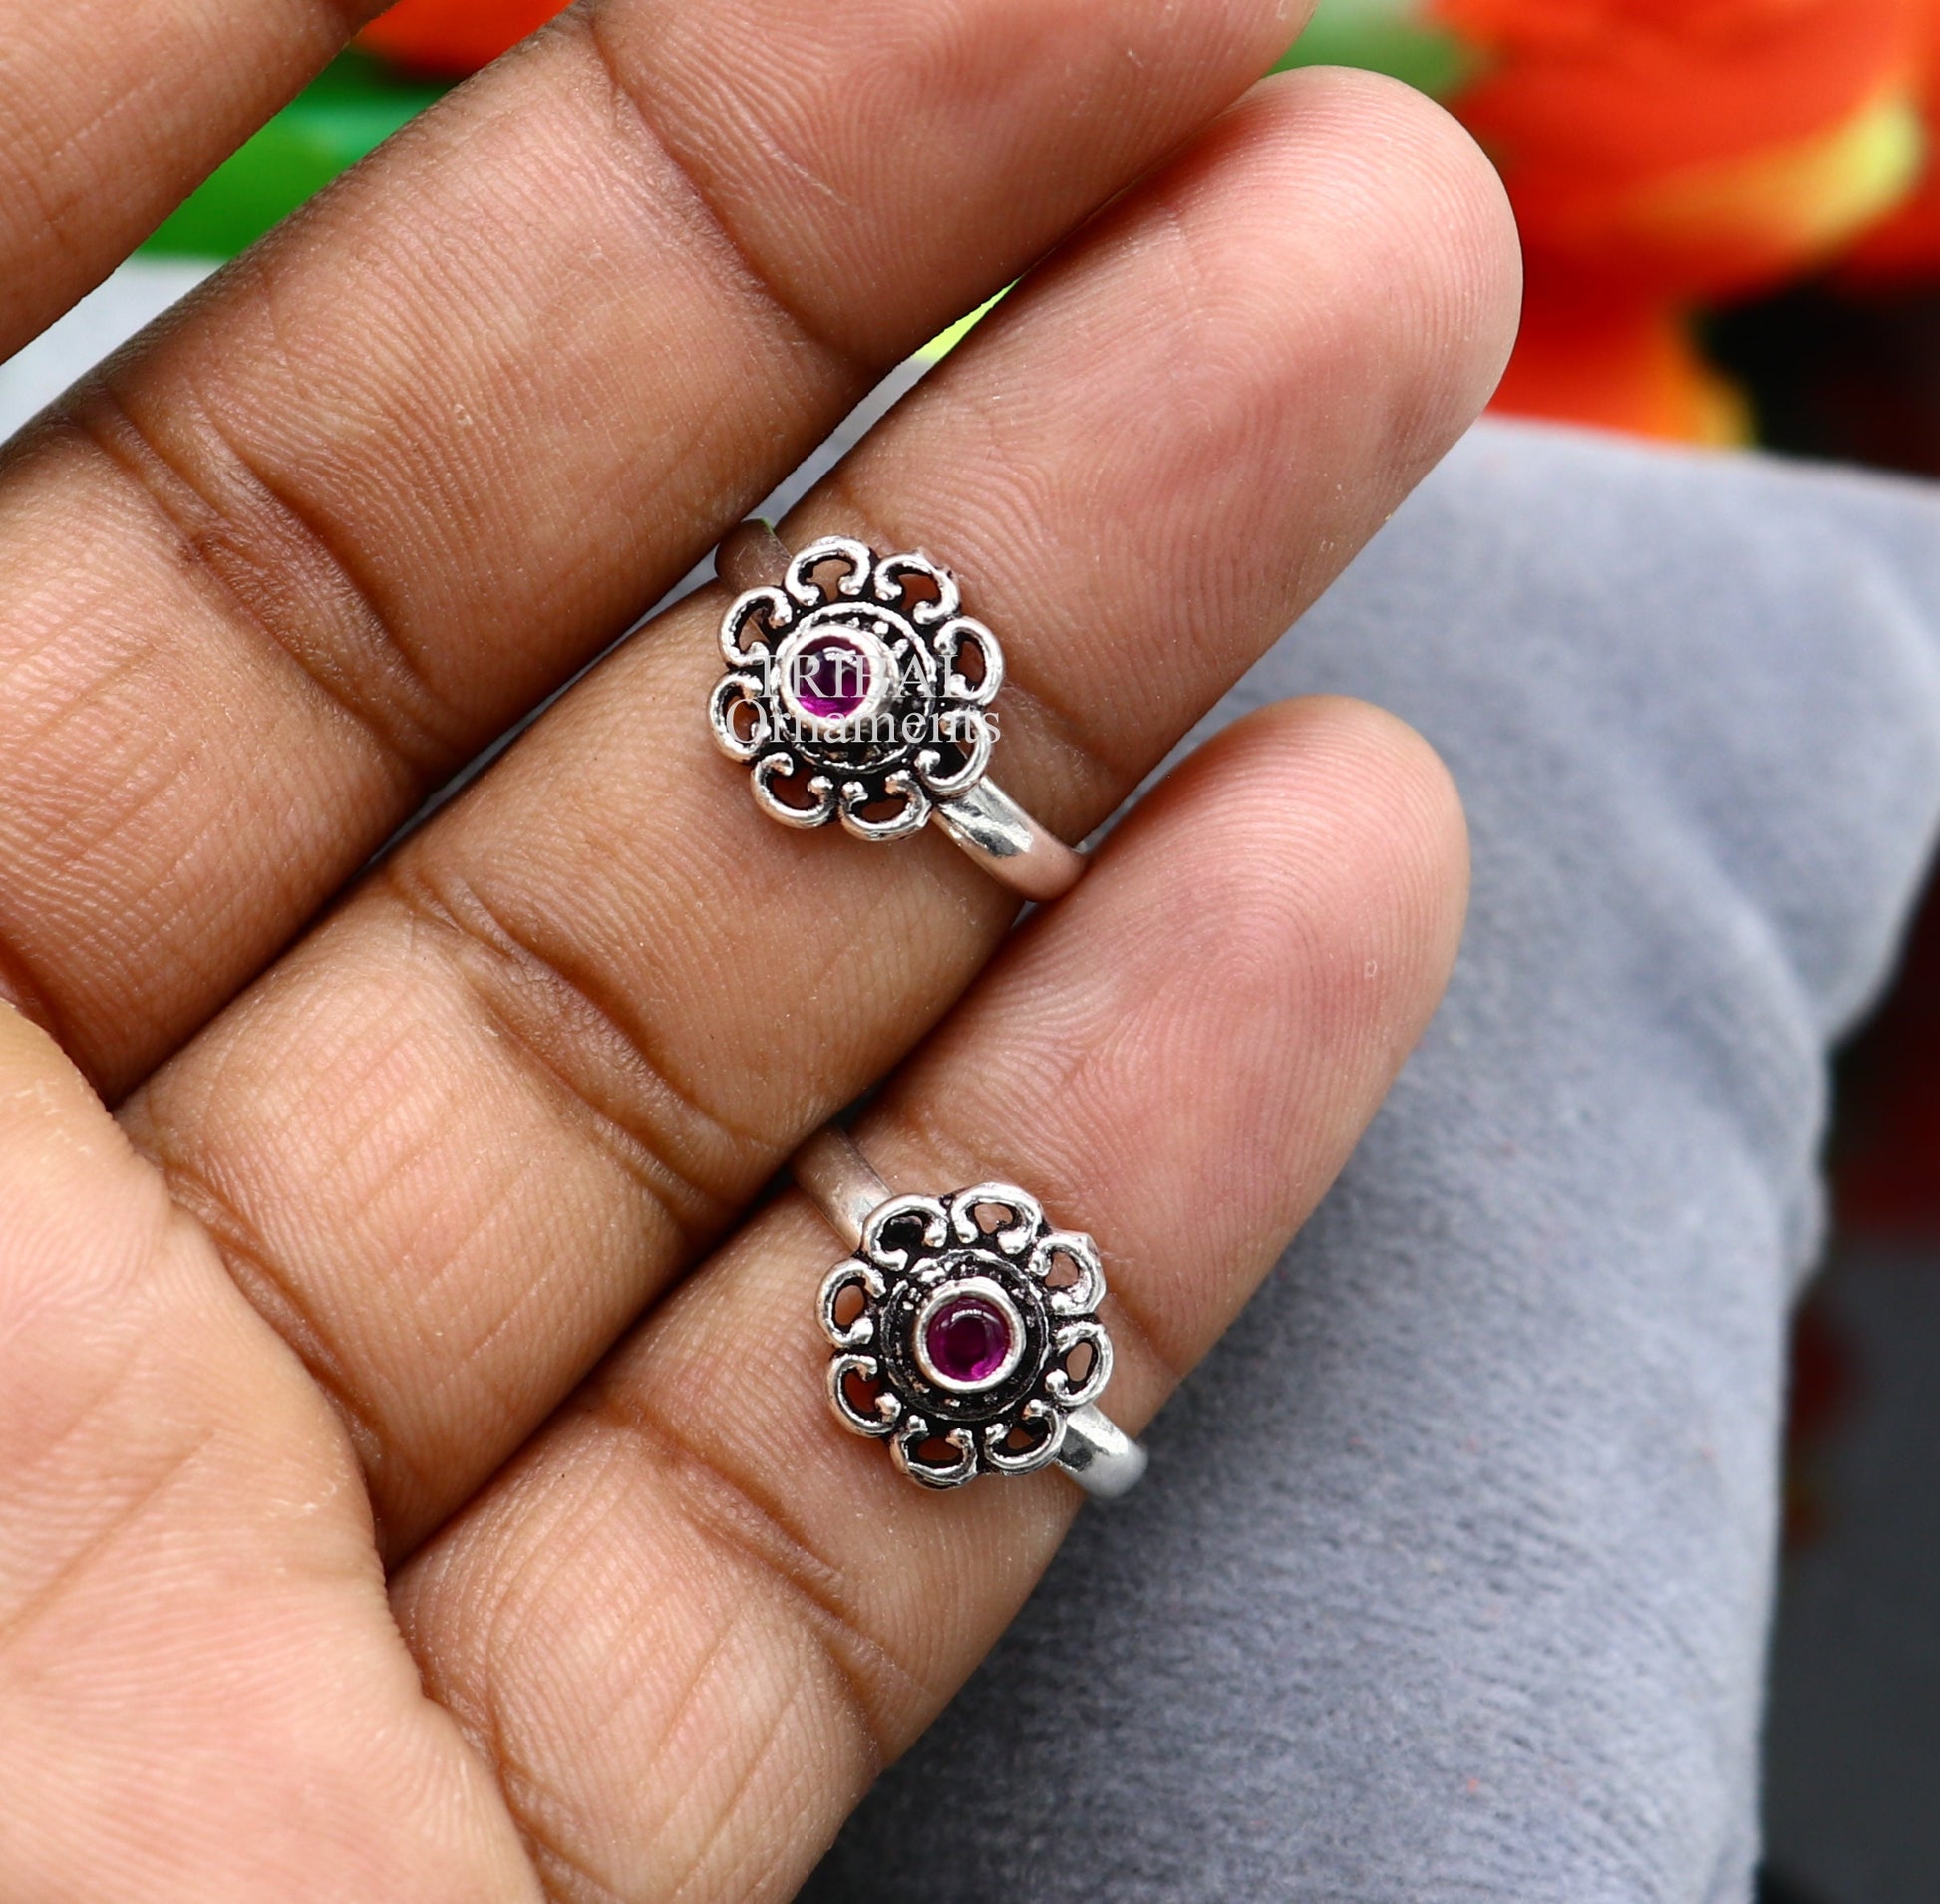 925 sterling silver handmade fabulous tiny toe ring band Red stone tribal belly dance vintage style ethnic jewelry from India toer135 - TRIBAL ORNAMENTS